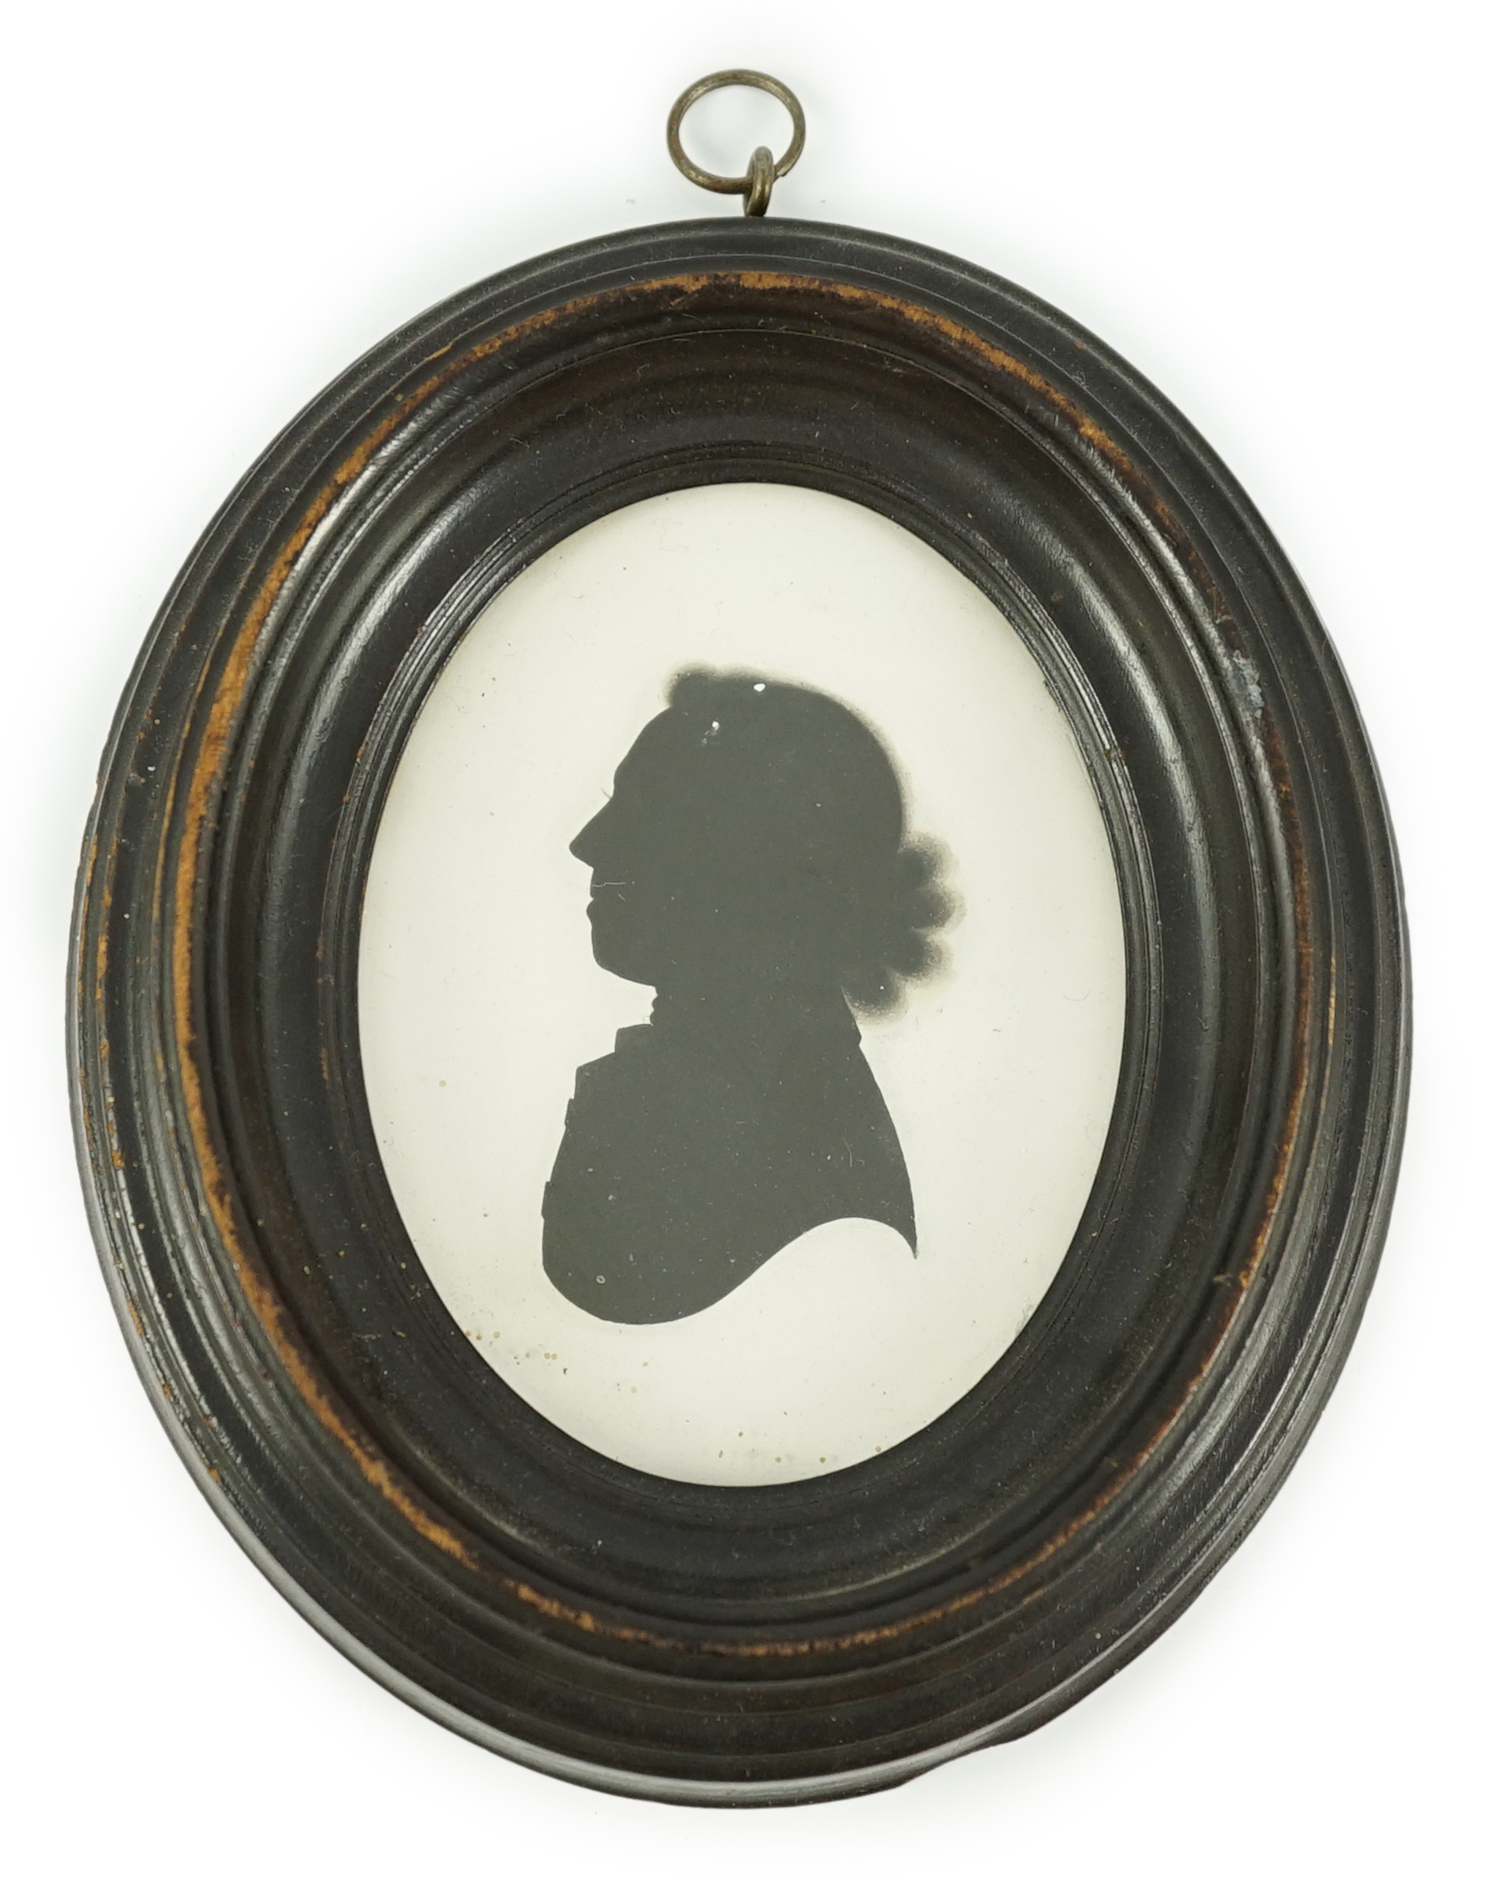 John Miers (1756-1821), Silhouette of 'Lord John Bauff', painted plaster, 8.5 x 6.5cm.